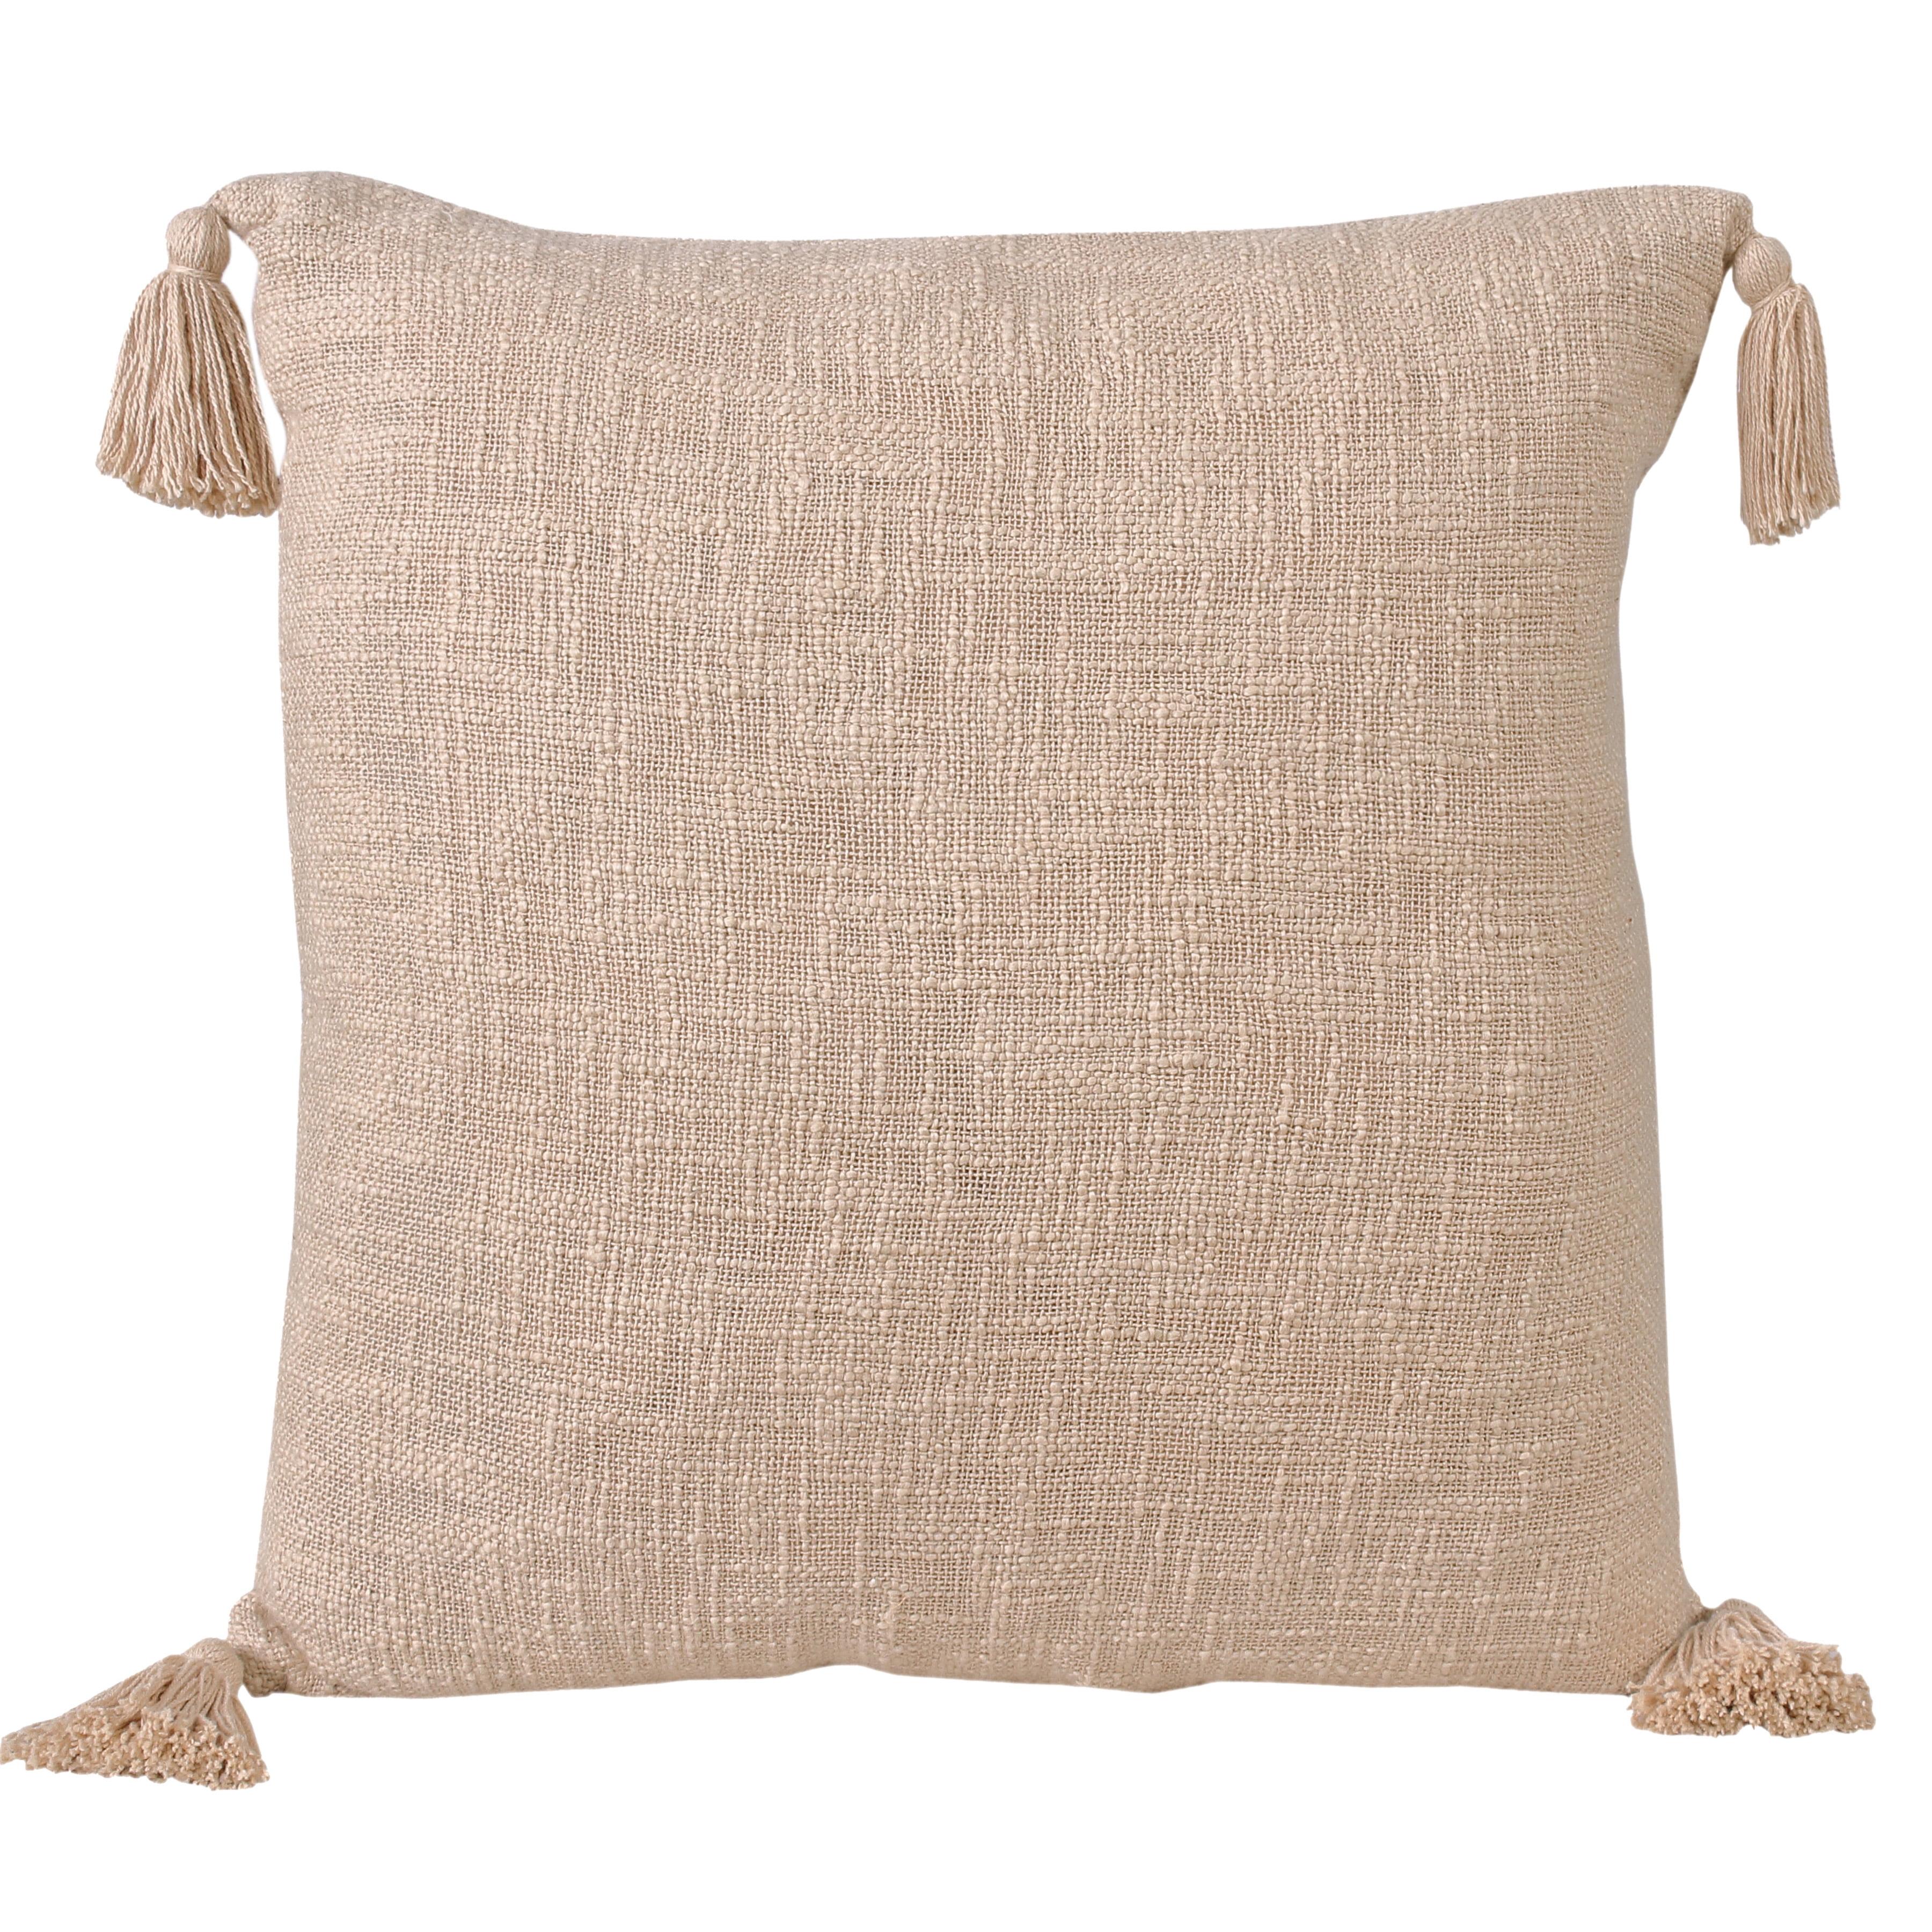 Ox Bay 20" Beige Textured Cotton Square Throw Pillow with Tassels